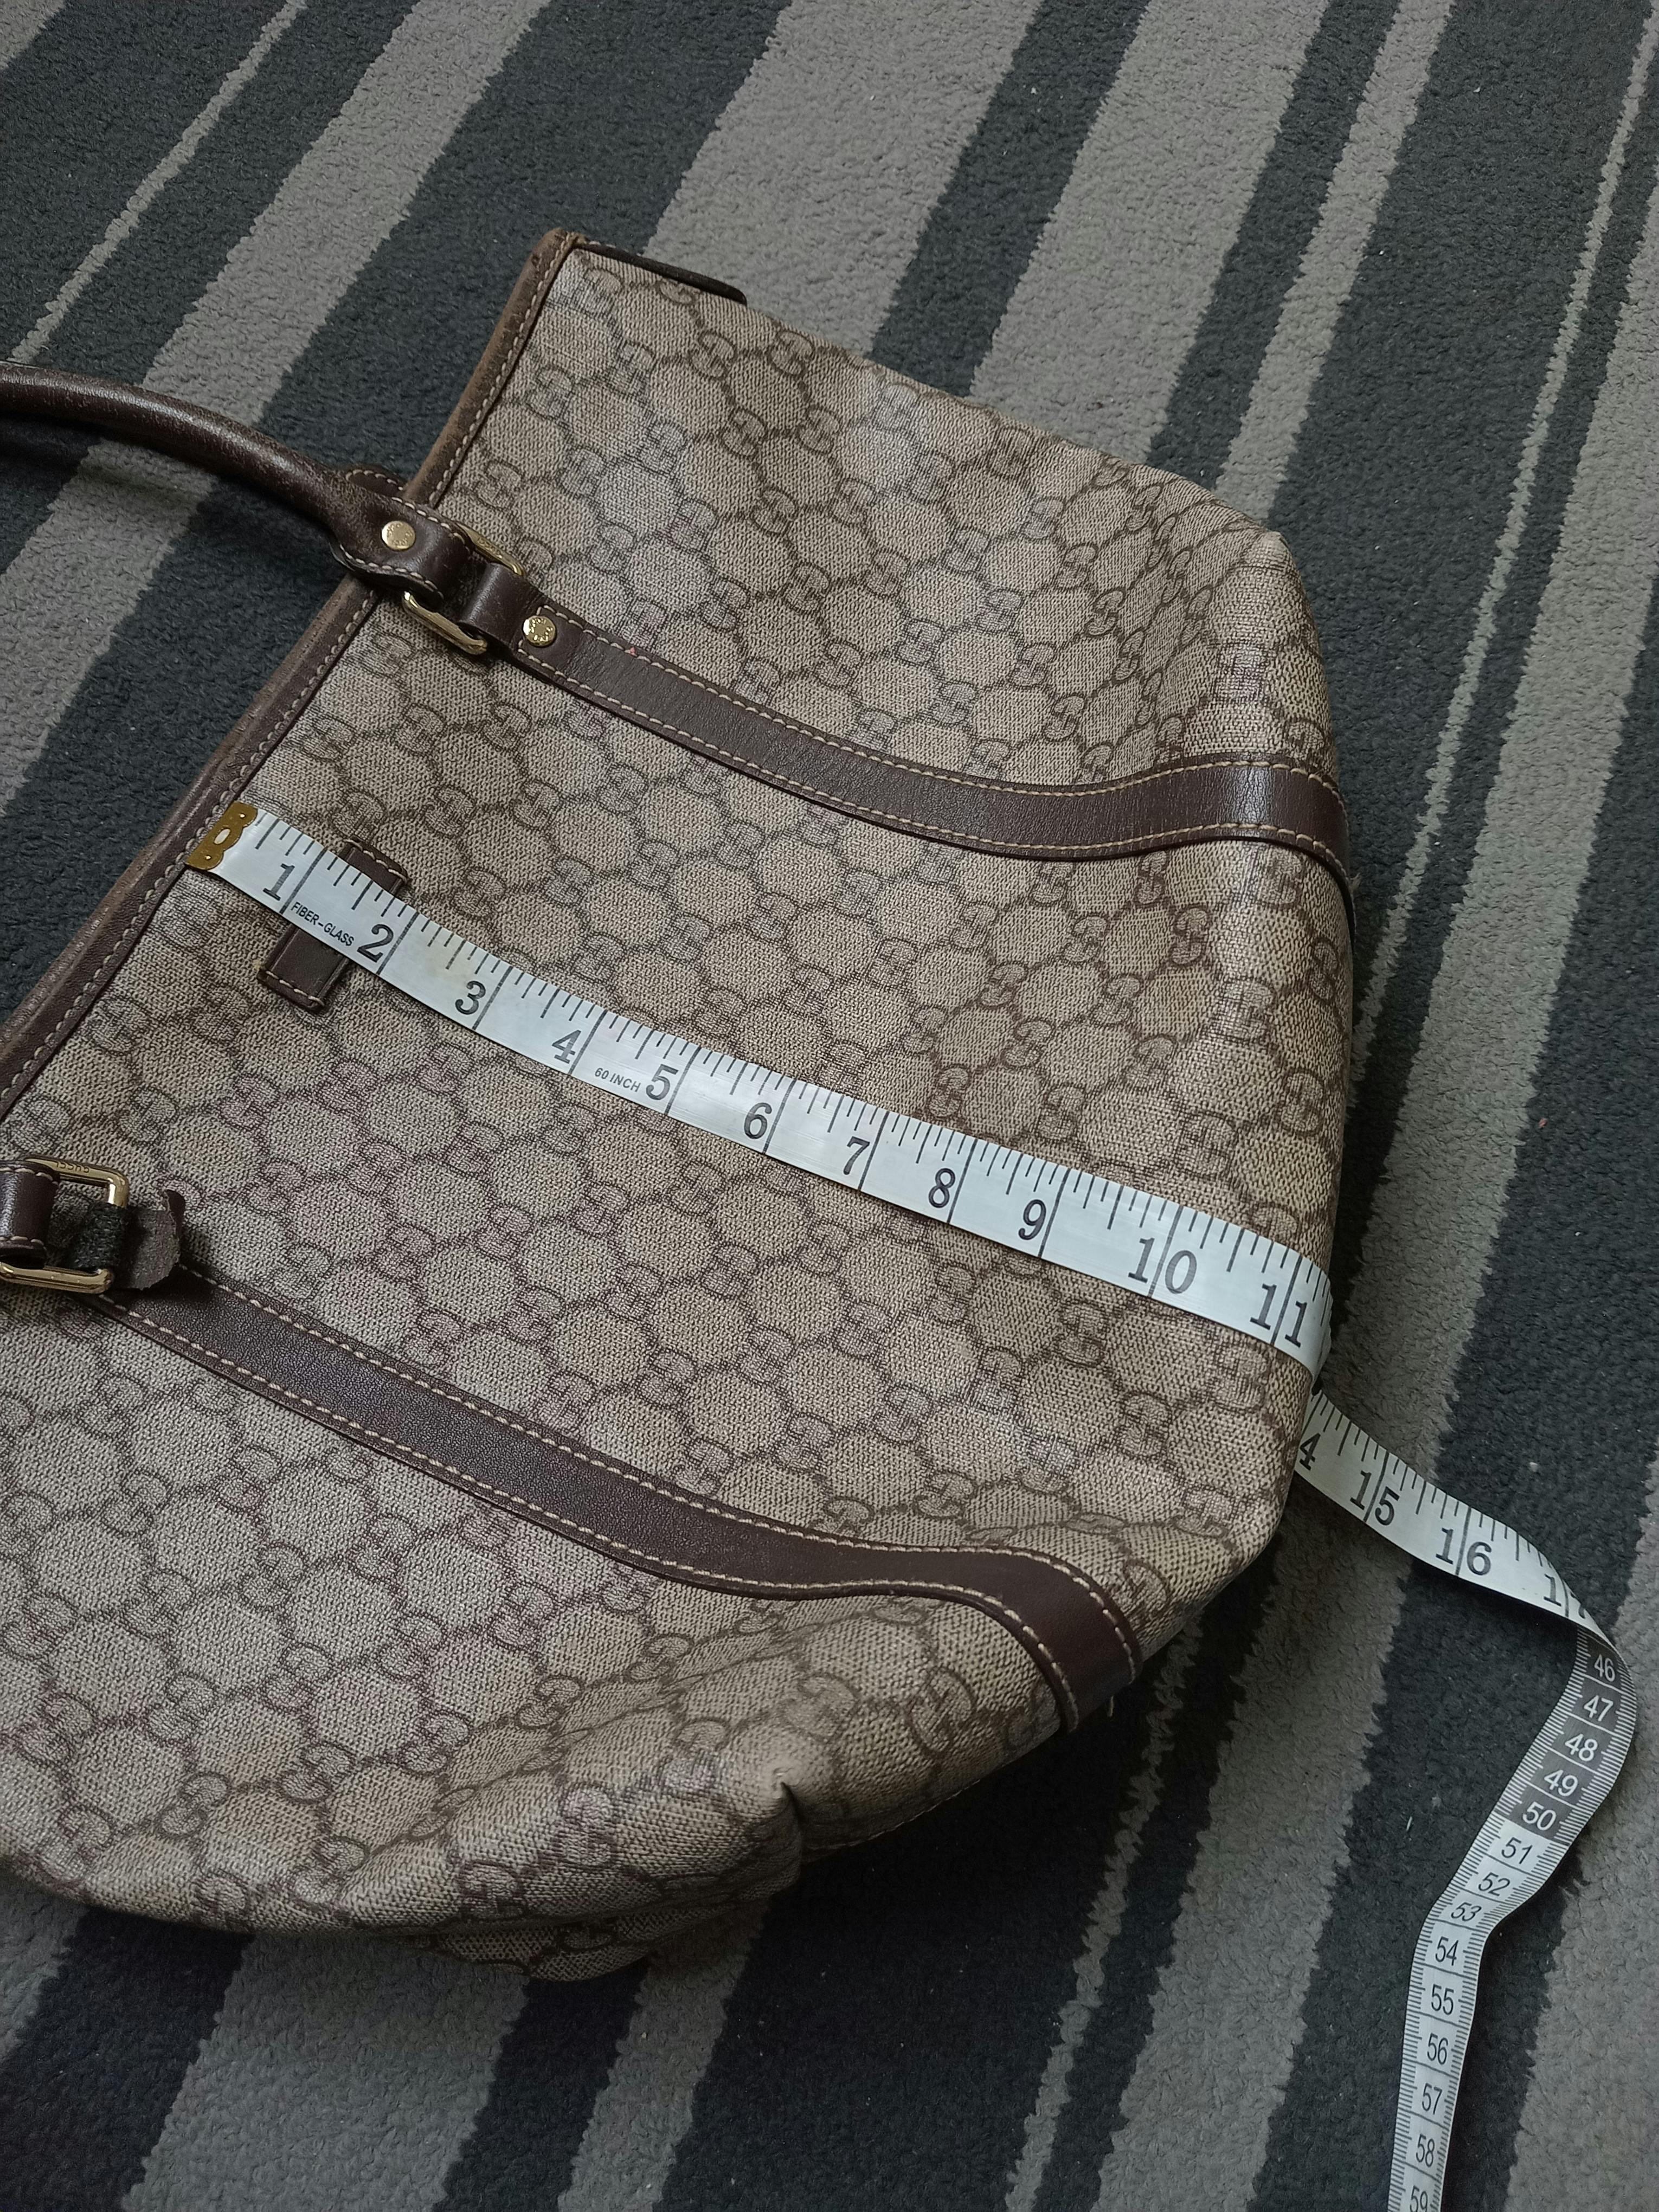 Authentic Gucci GG Canvas Beige Brown Tote Bag - 8